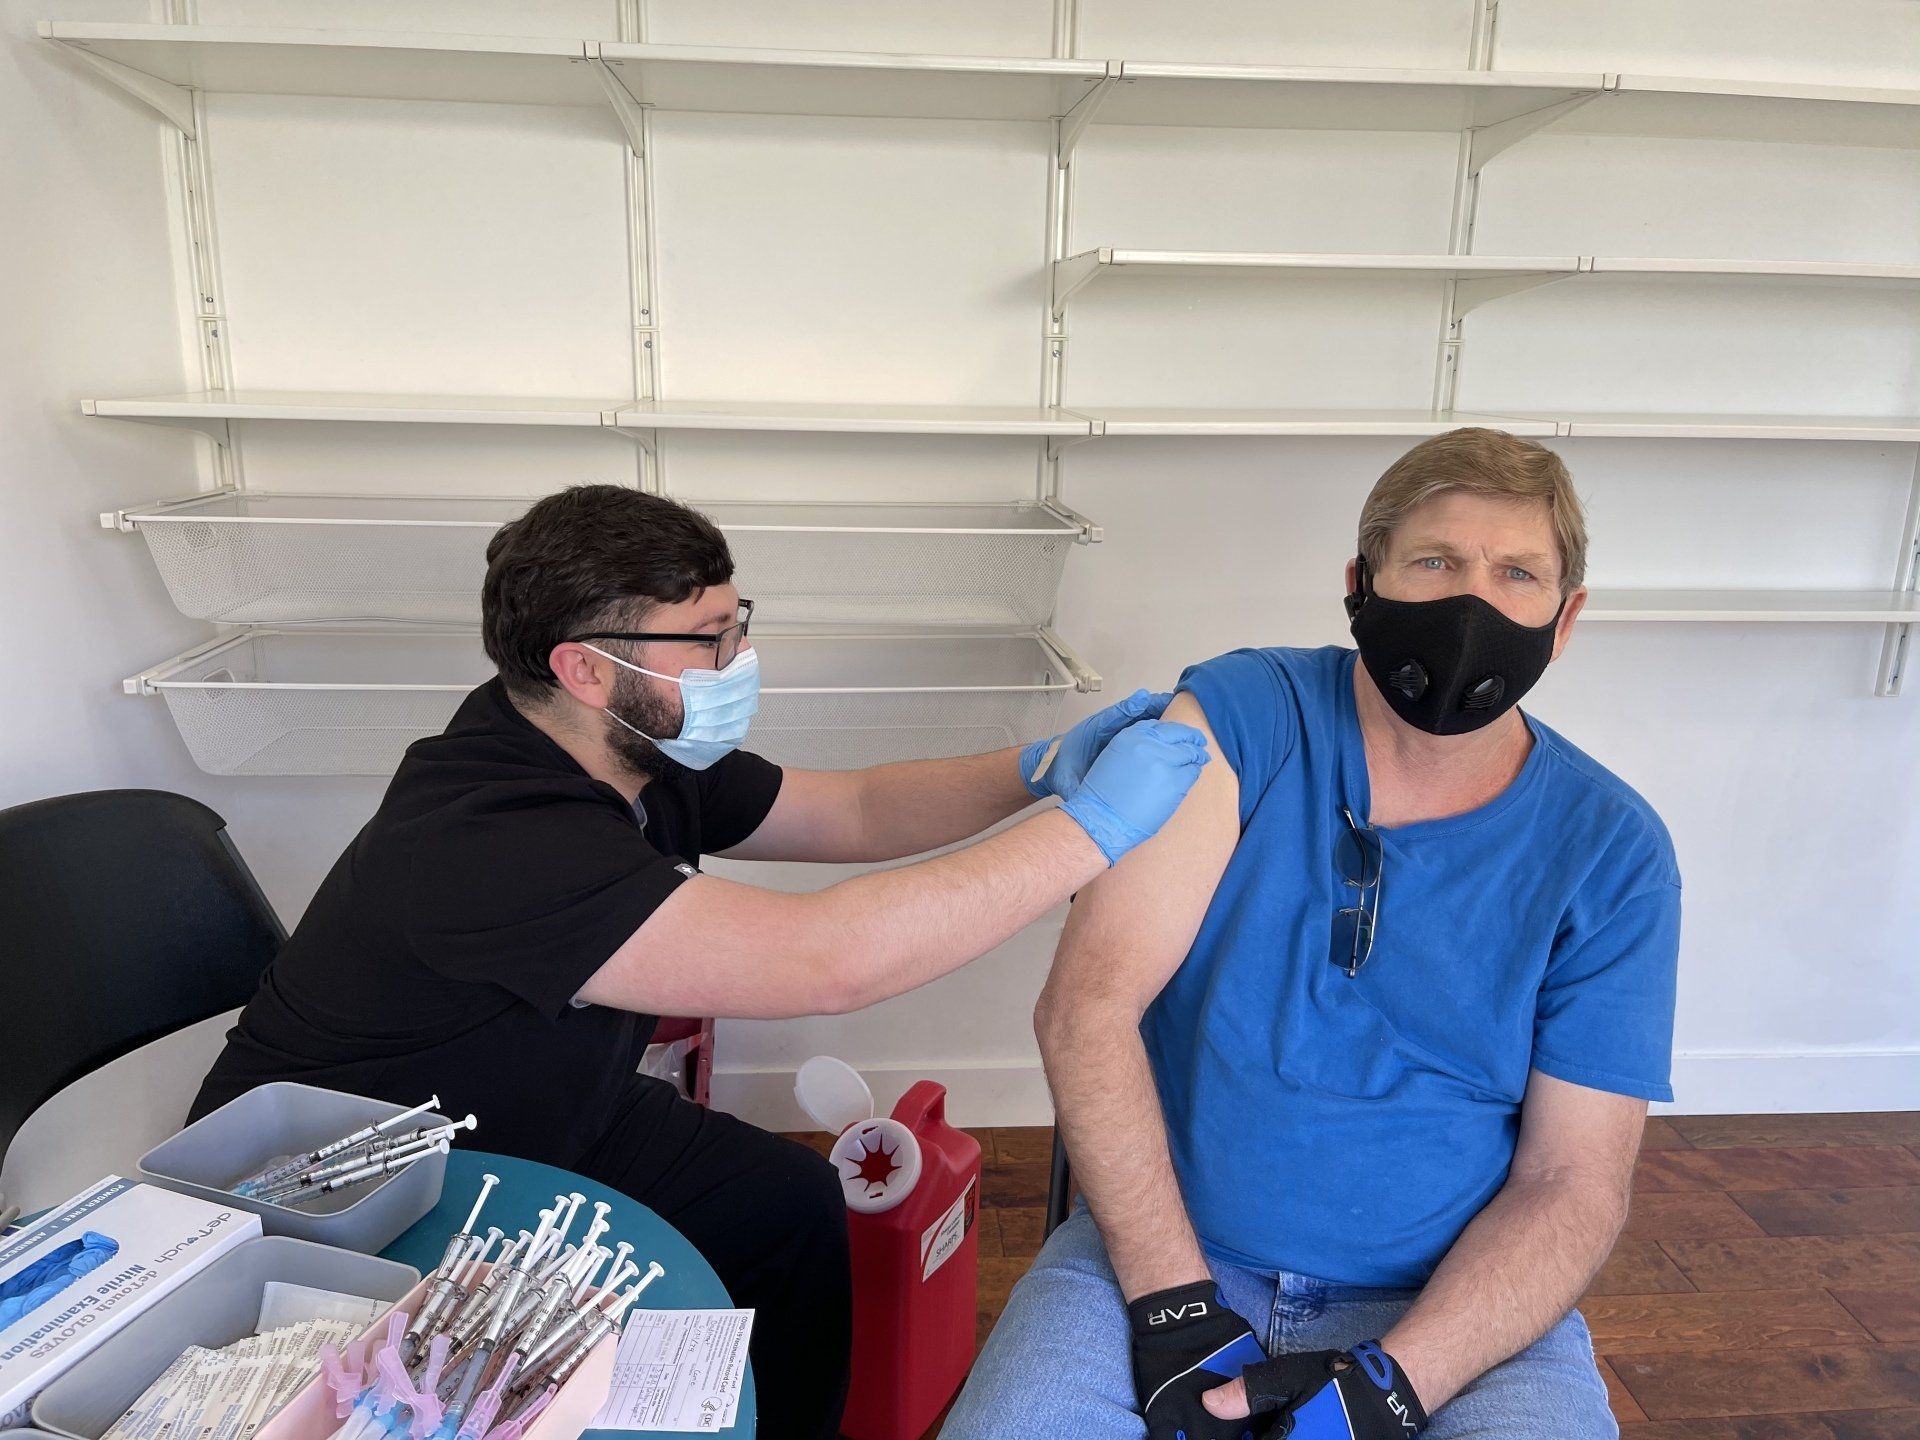 Global Resources and Supports held a vaccine pop-up clinic for COVID-19